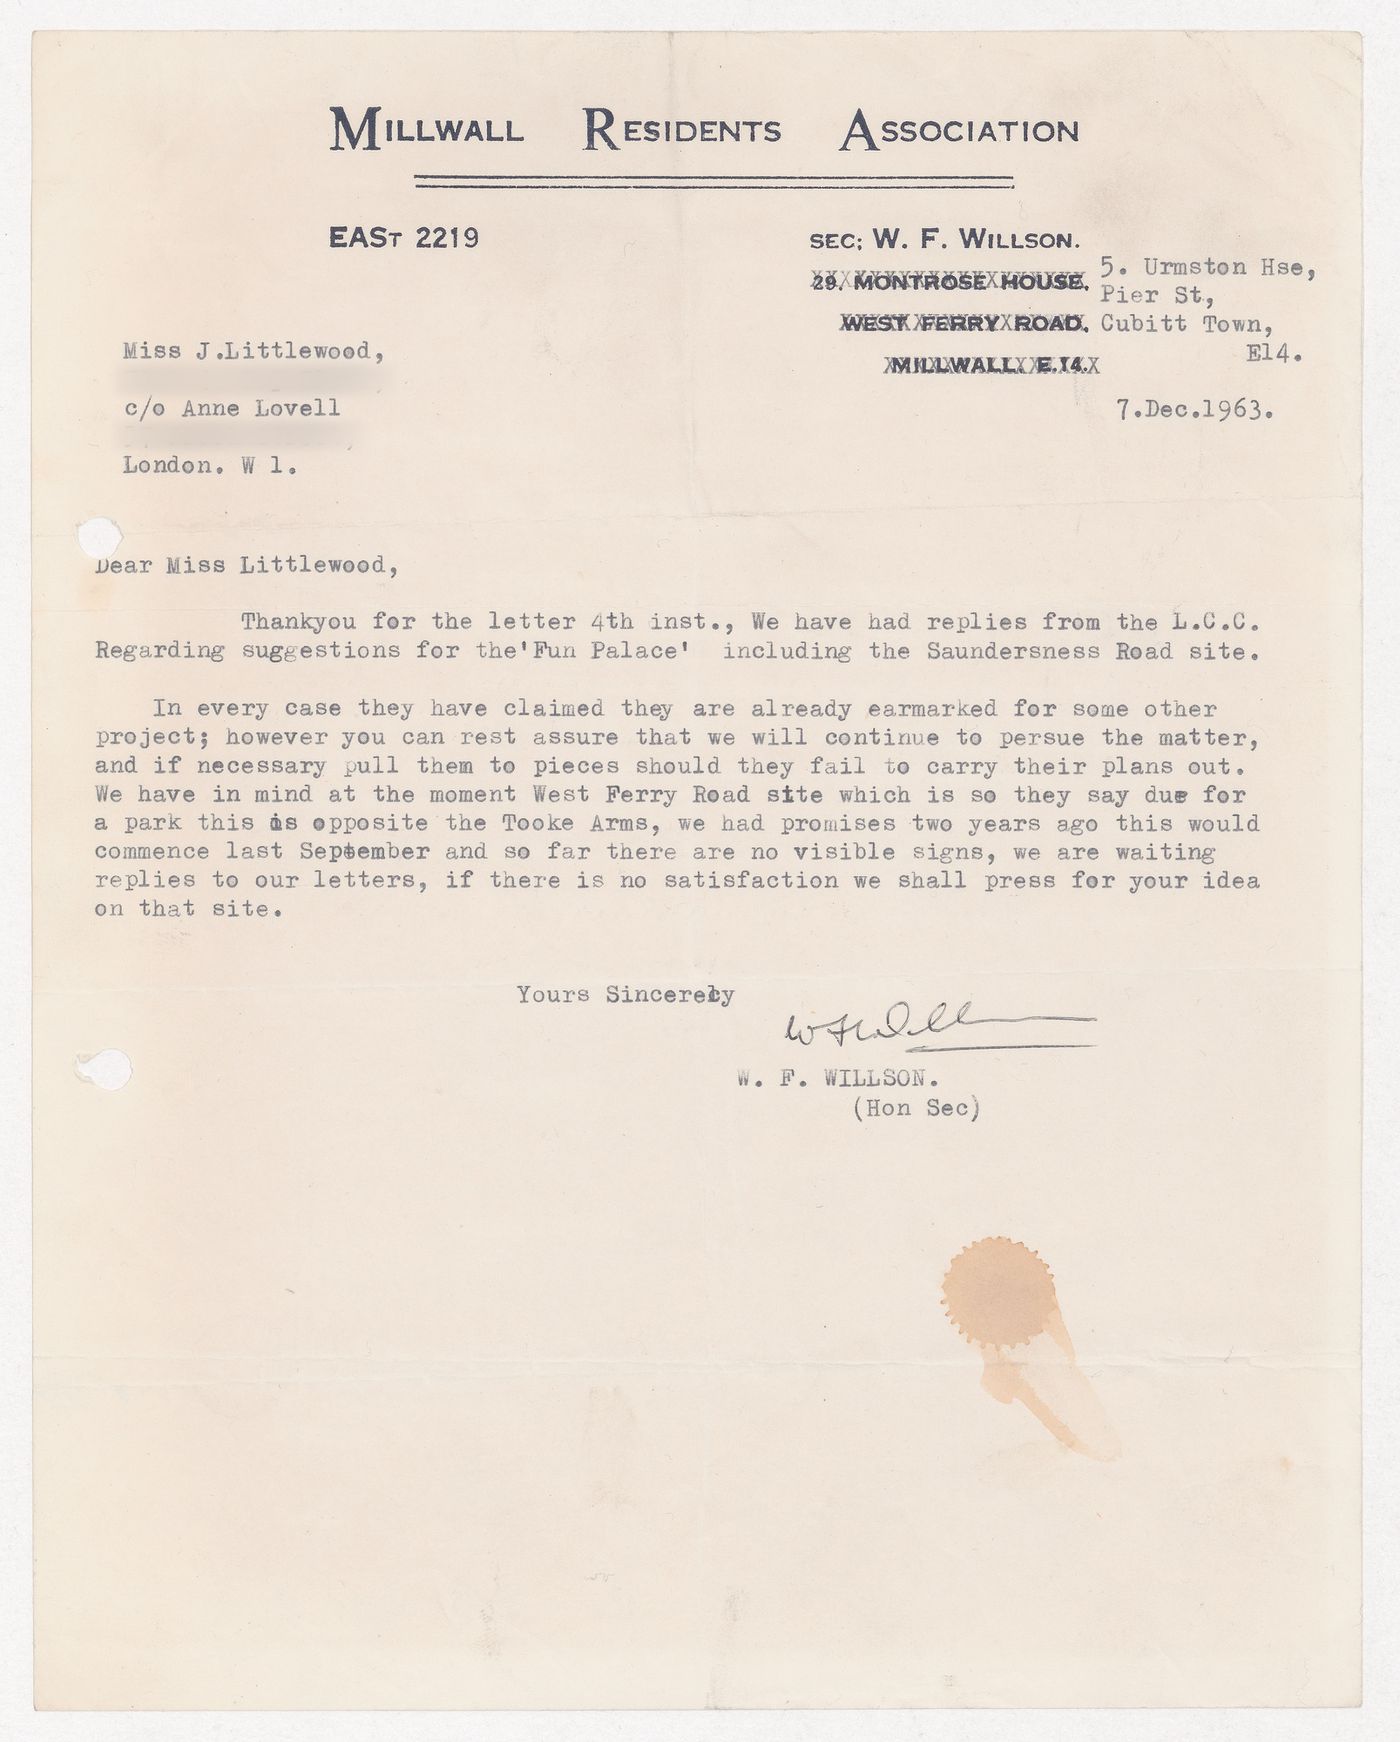 Letter from W.F. Willson to Joan Littlewood regarding the Fun Palace Project